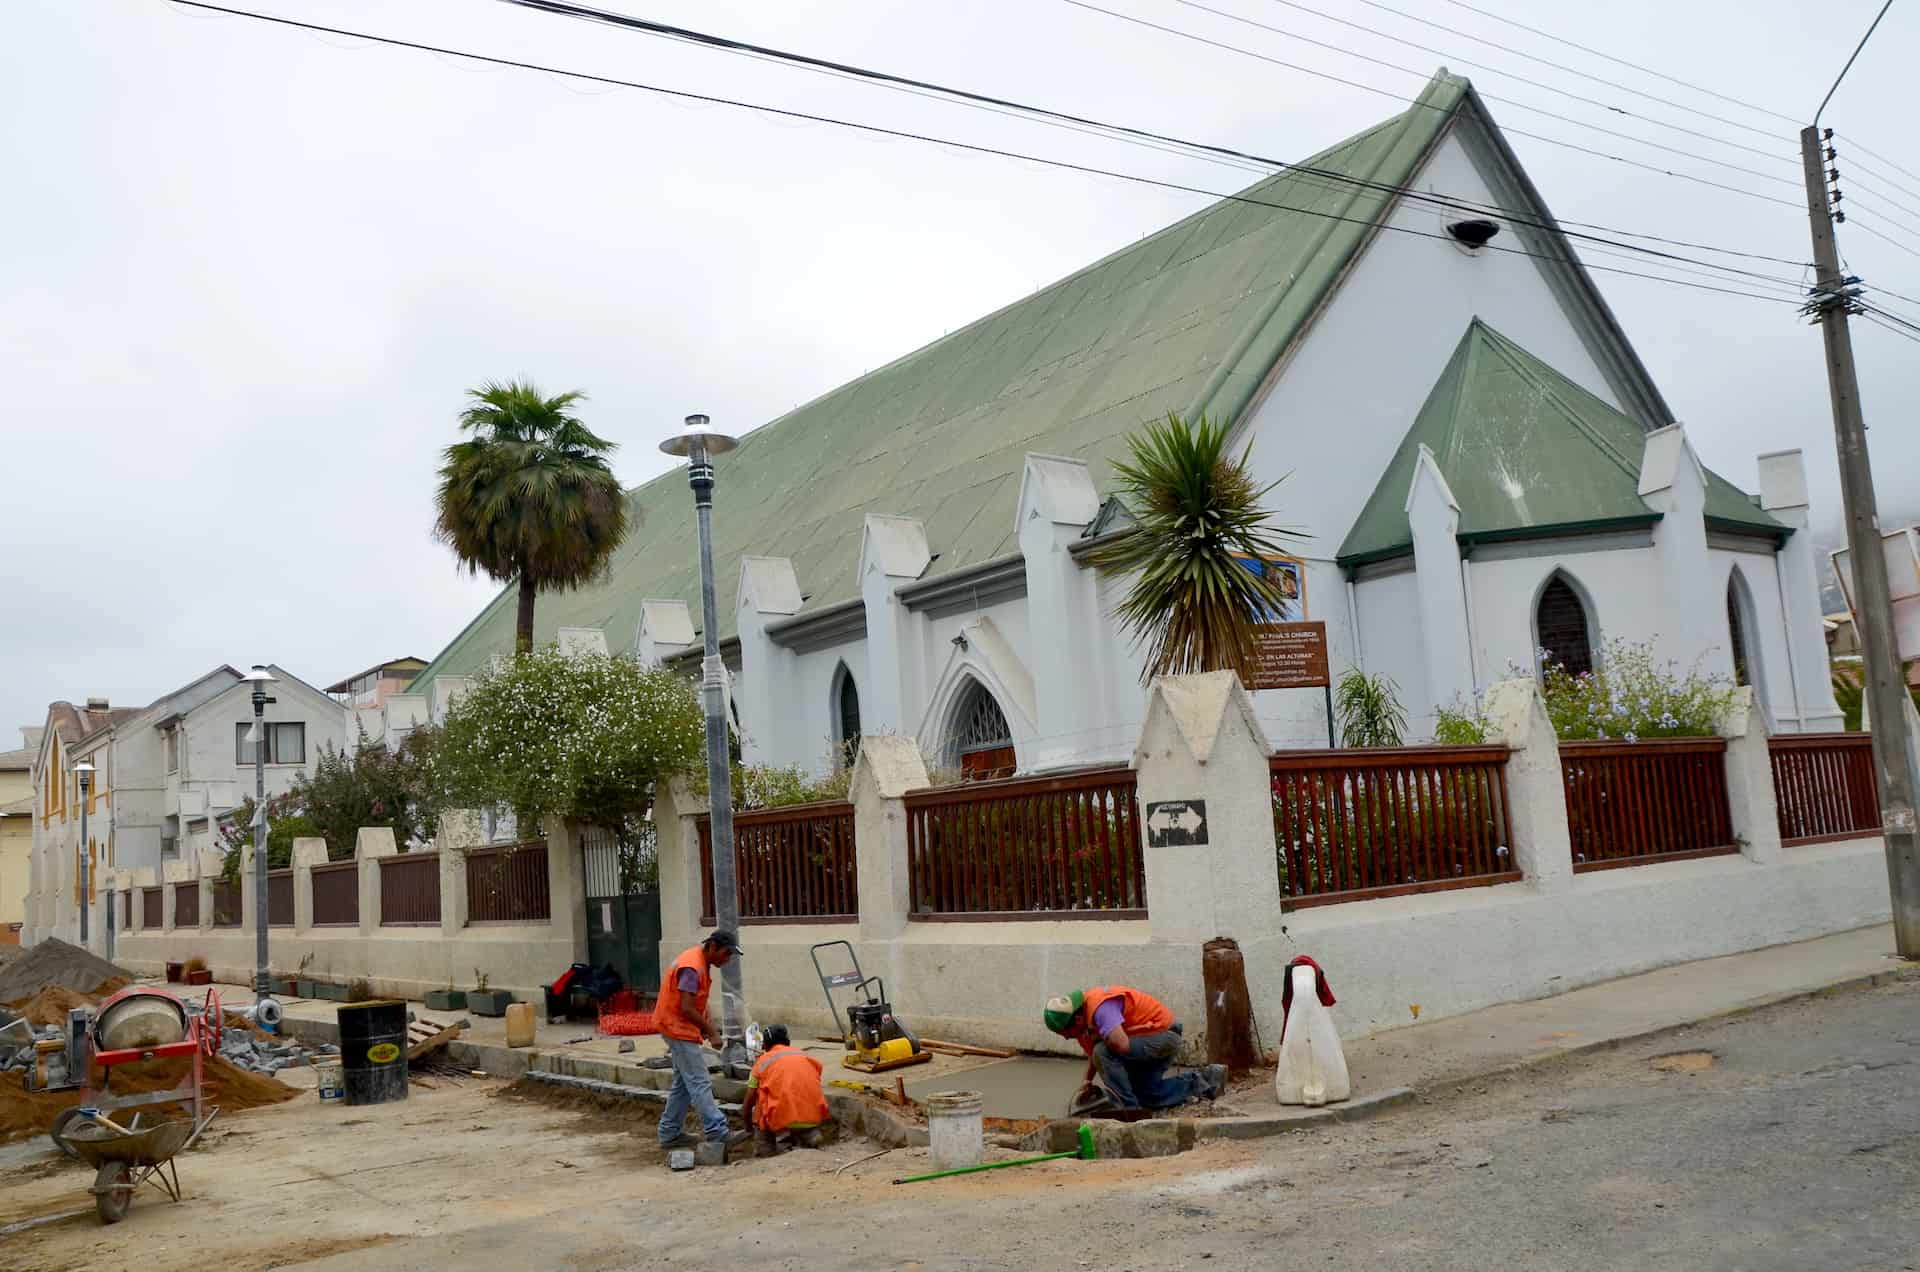 St. Paul’s Anglican Church in Valparaíso, Chile